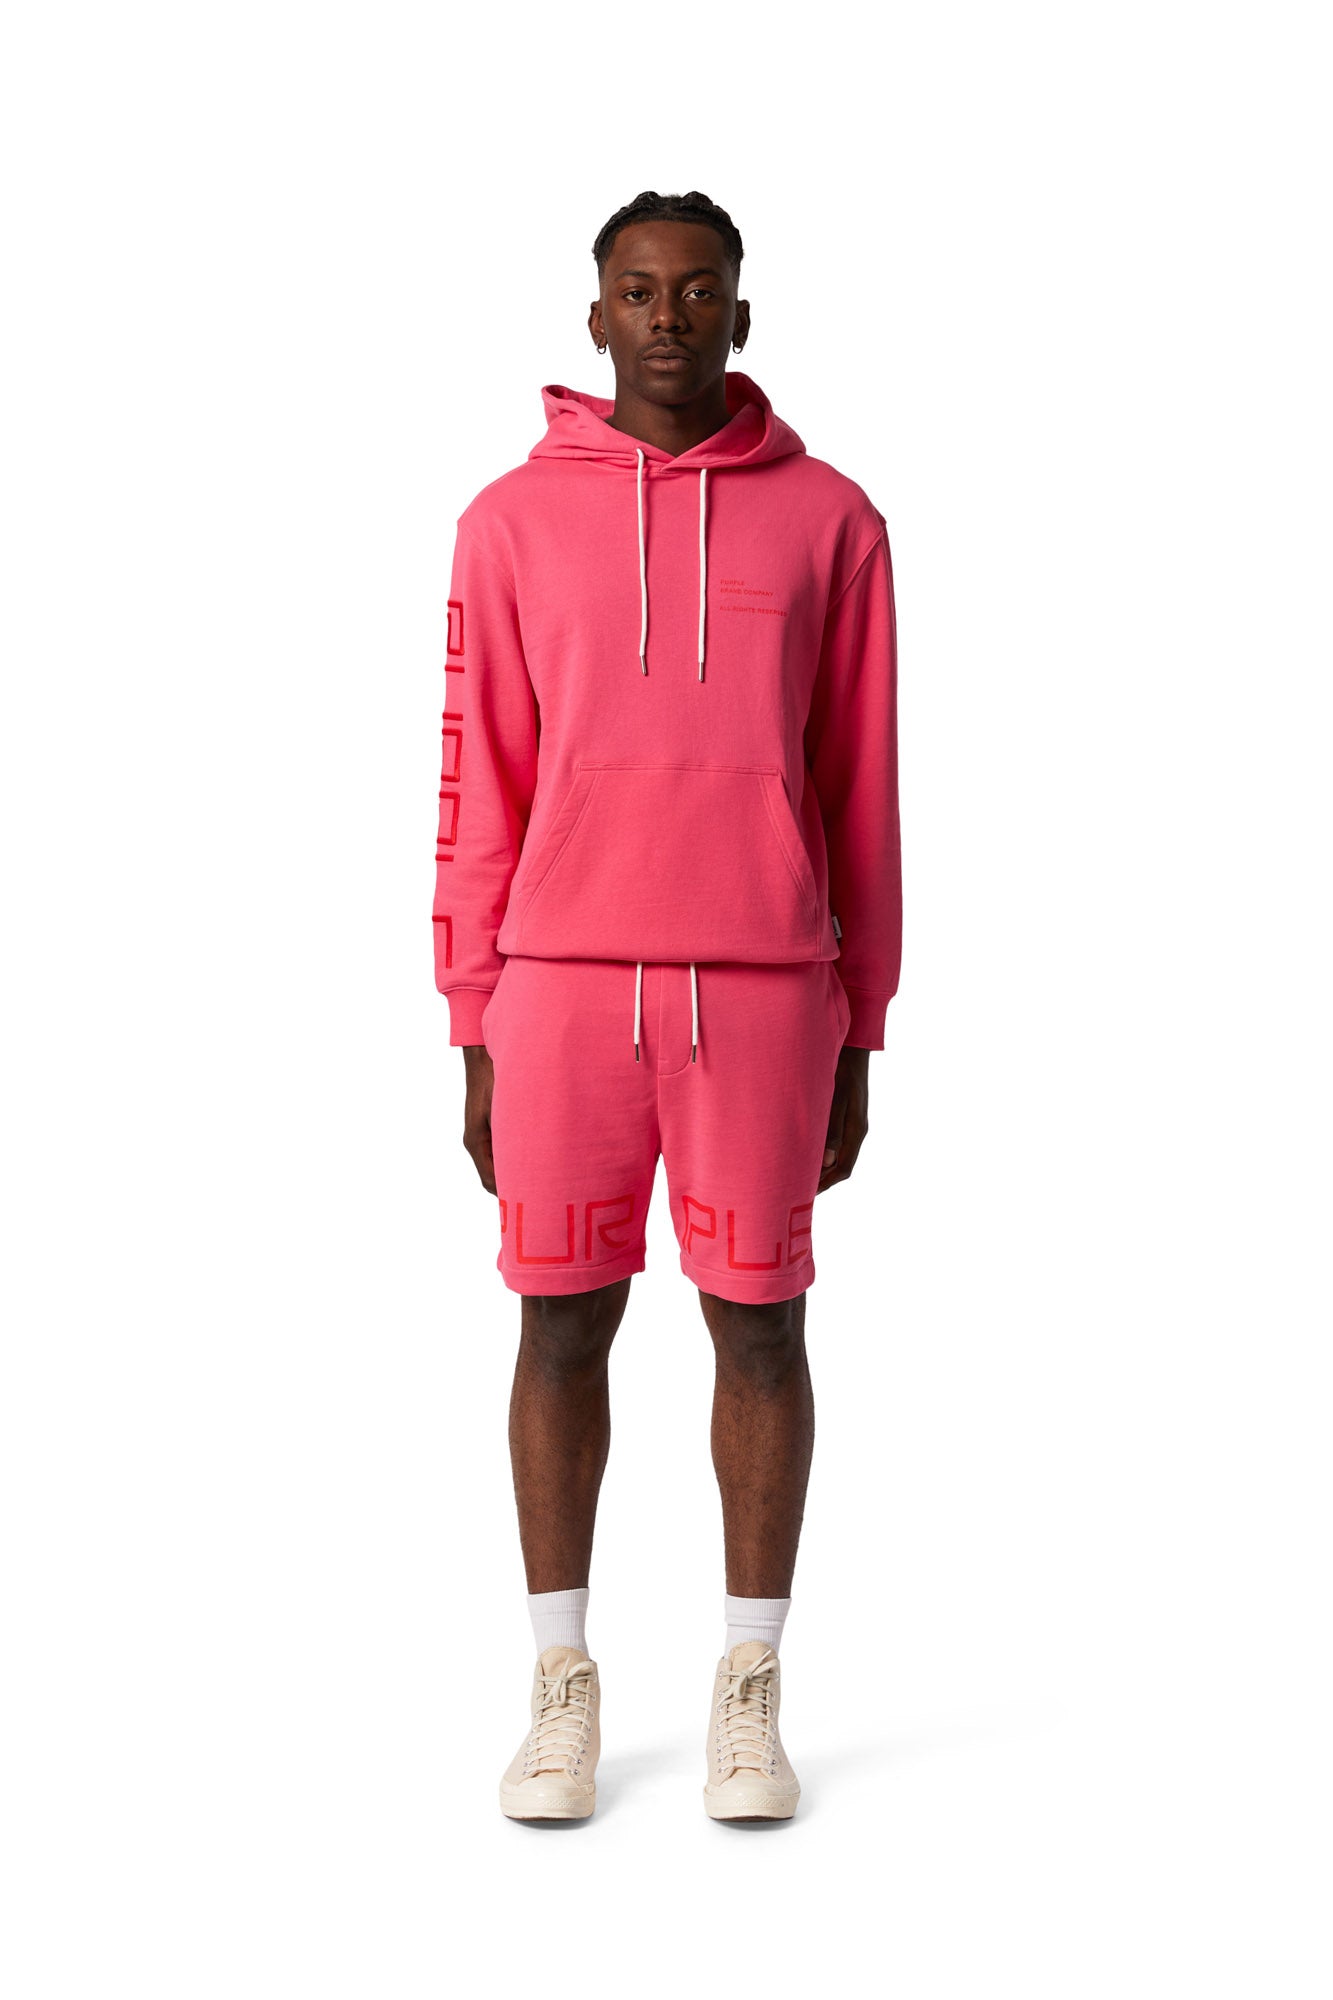 P413 RELAXED FIT SHORT - WORDMARK HOT PINK - Clique Apparel